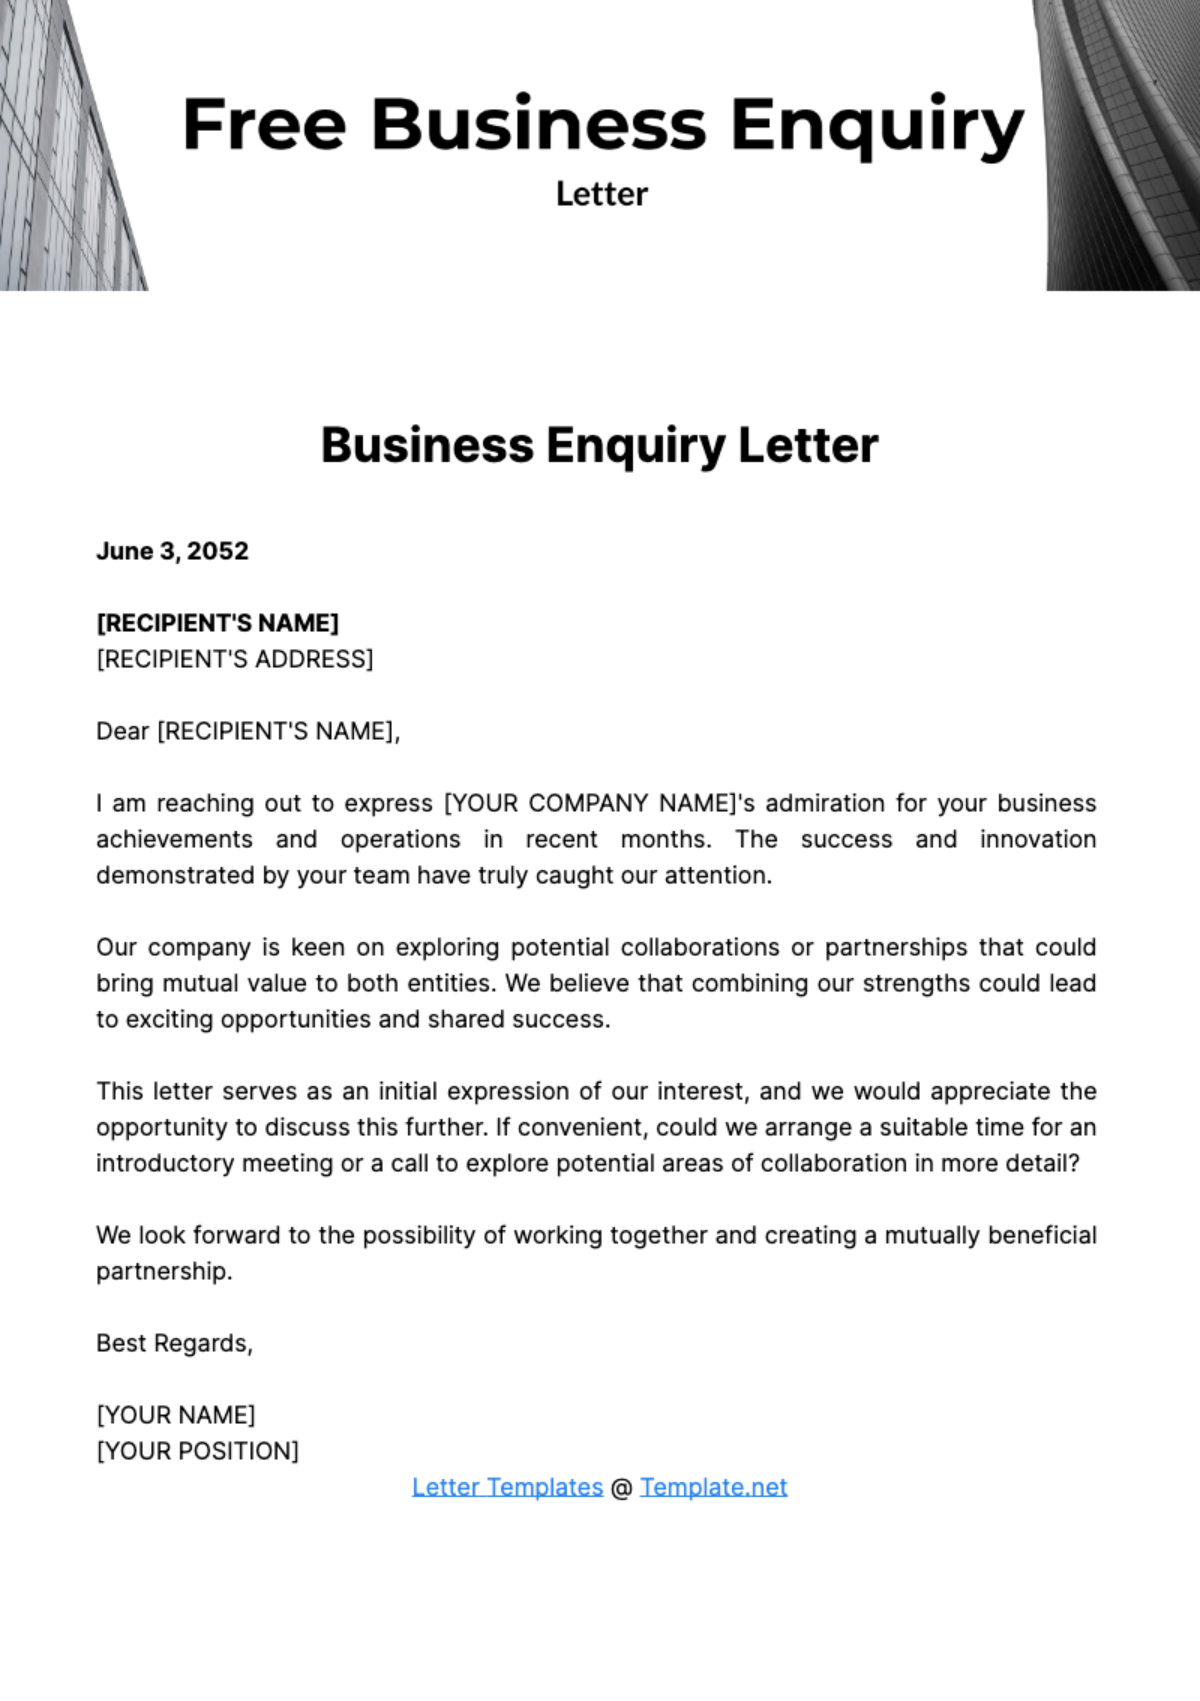 Free Business Enquiry Letter Template